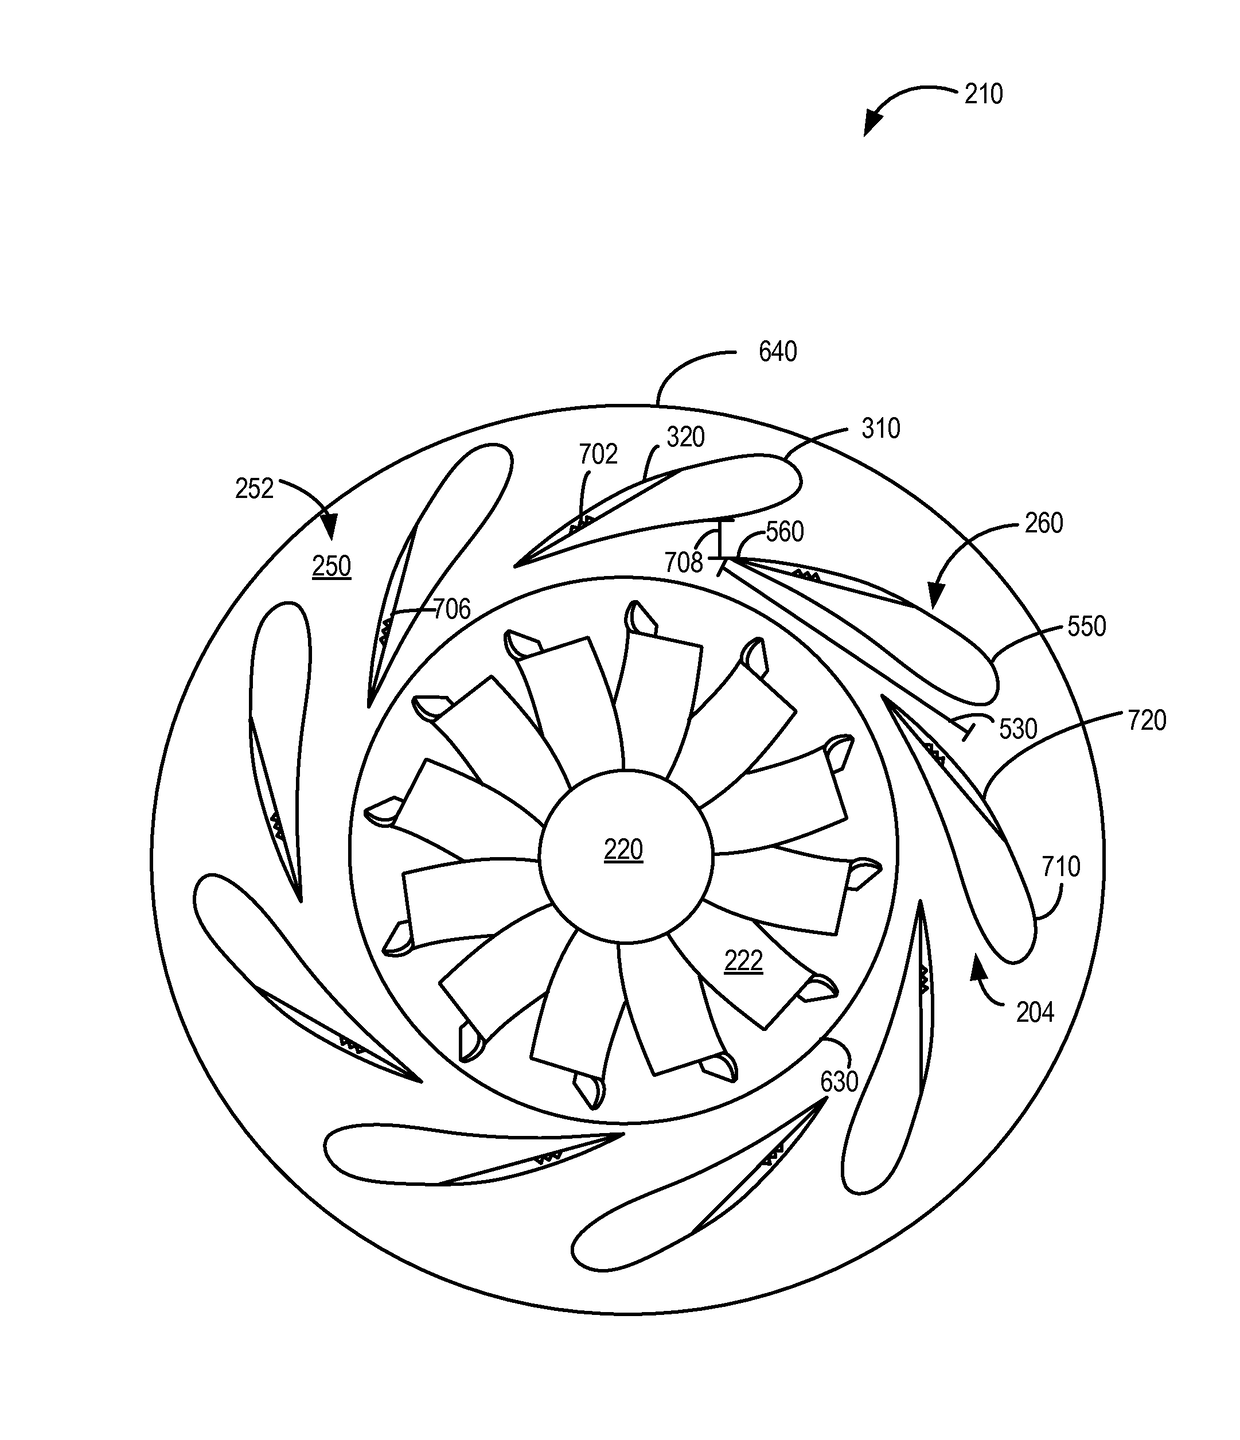 Systems and methods for a variable geometry turbine nozzle